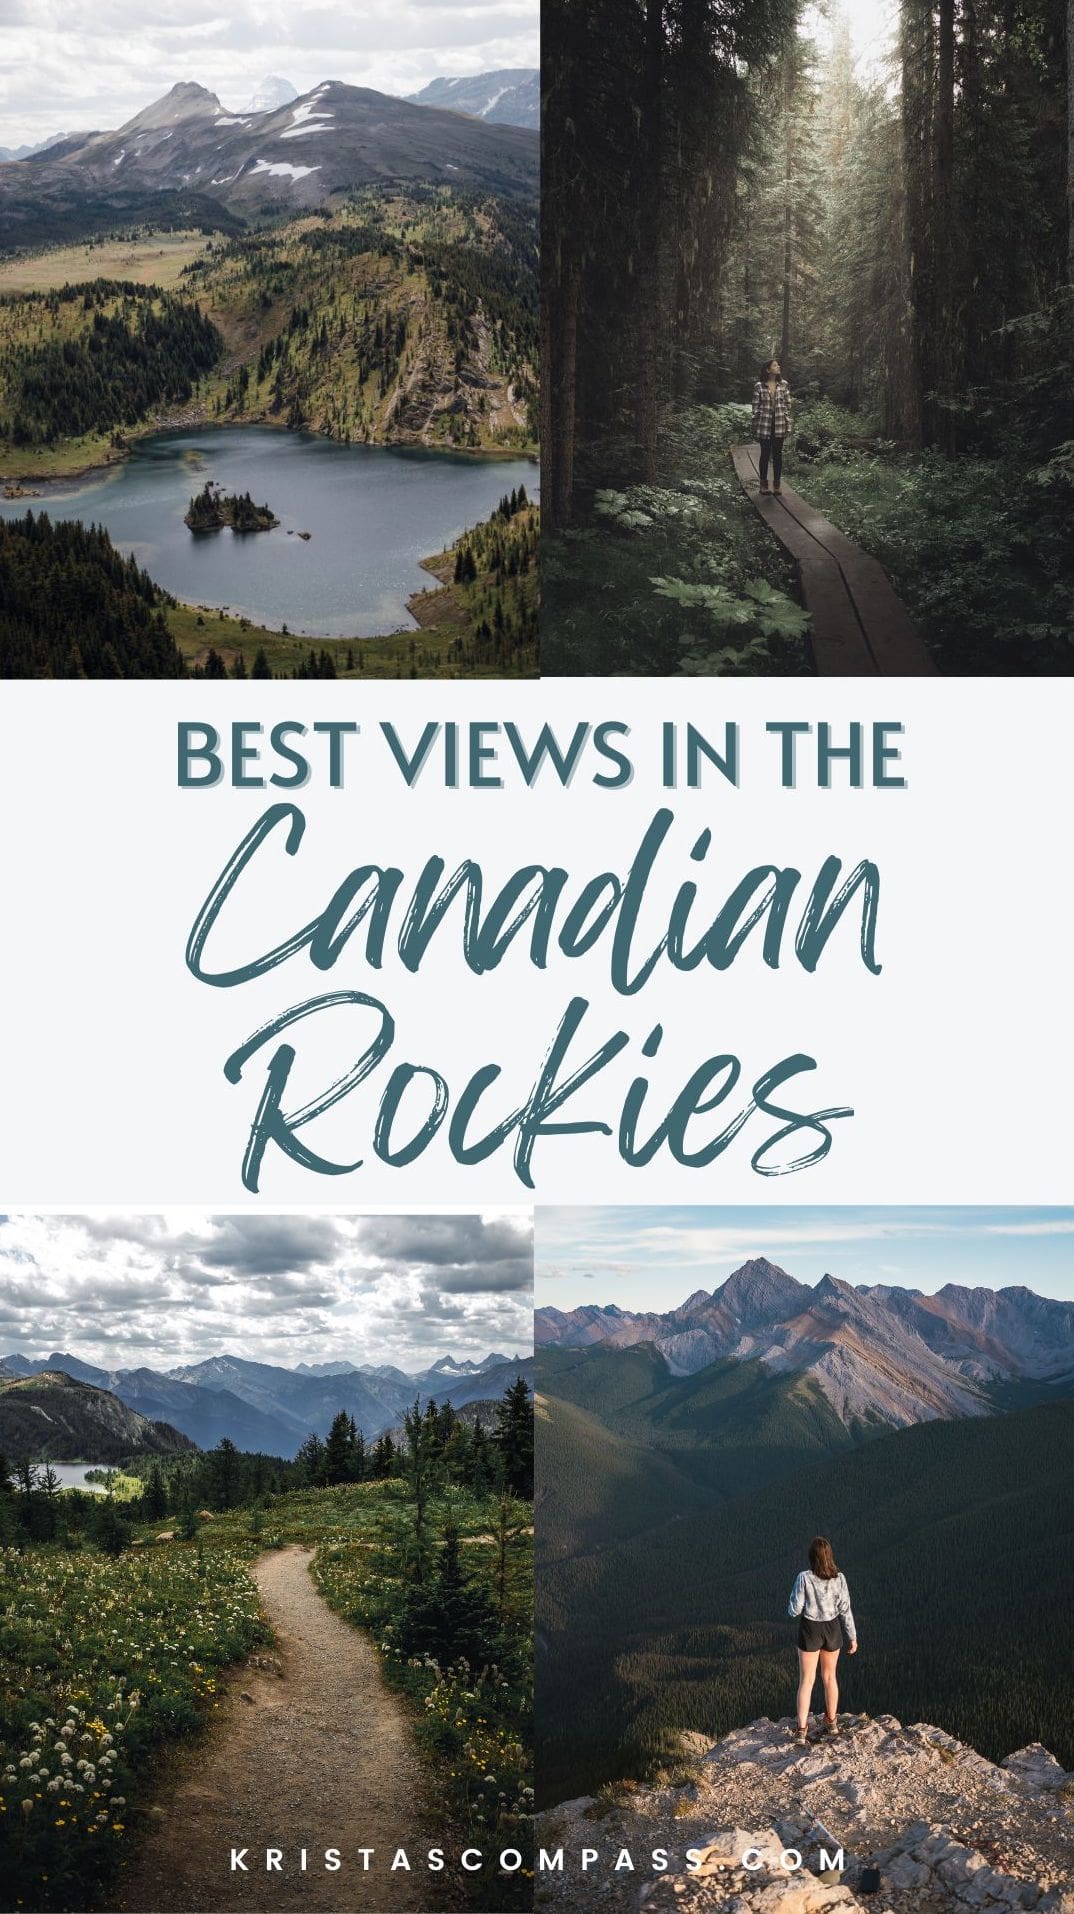 Canadian Rockies Hikes to add to your bucketlist